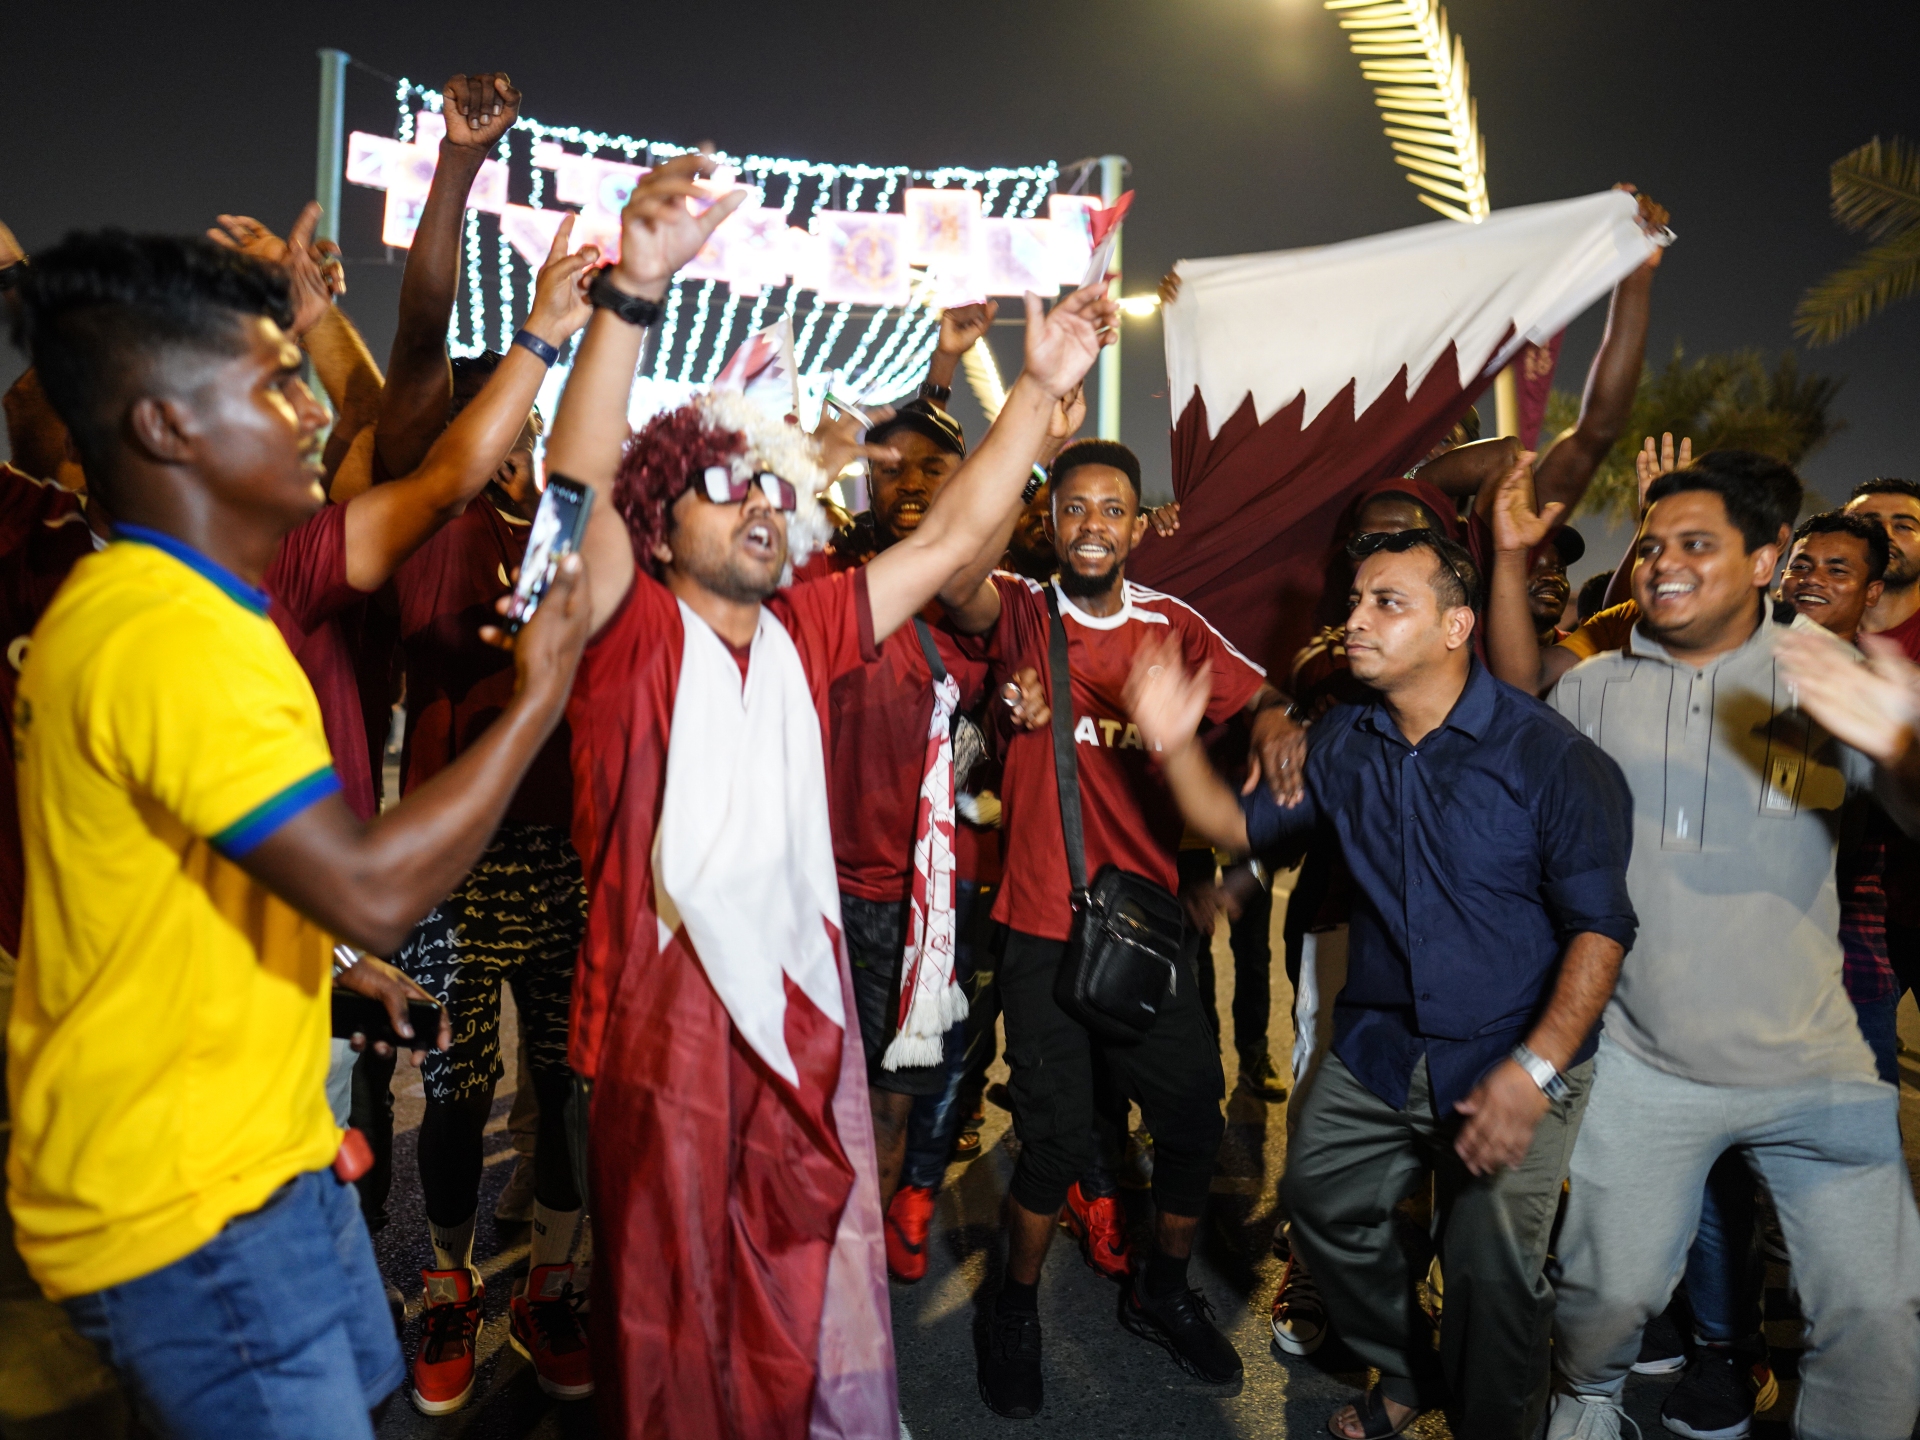 World Cup fans ready to party despite beer ban in Qatar stadiums